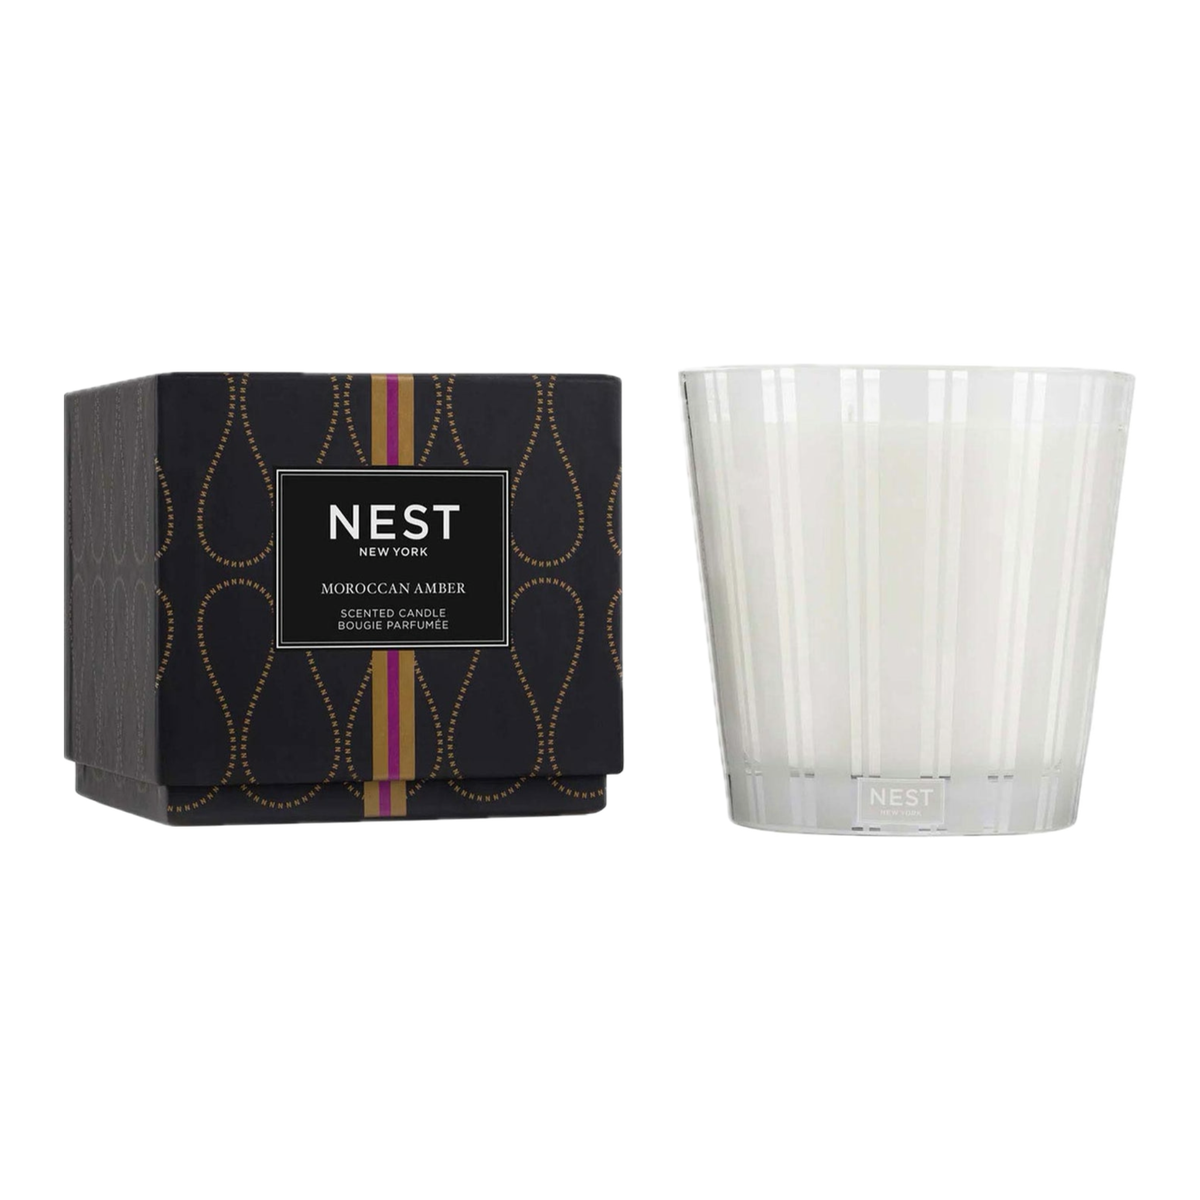 Product Image of Nest New York’s Moroccan Amber 3-Wick Candle with Box